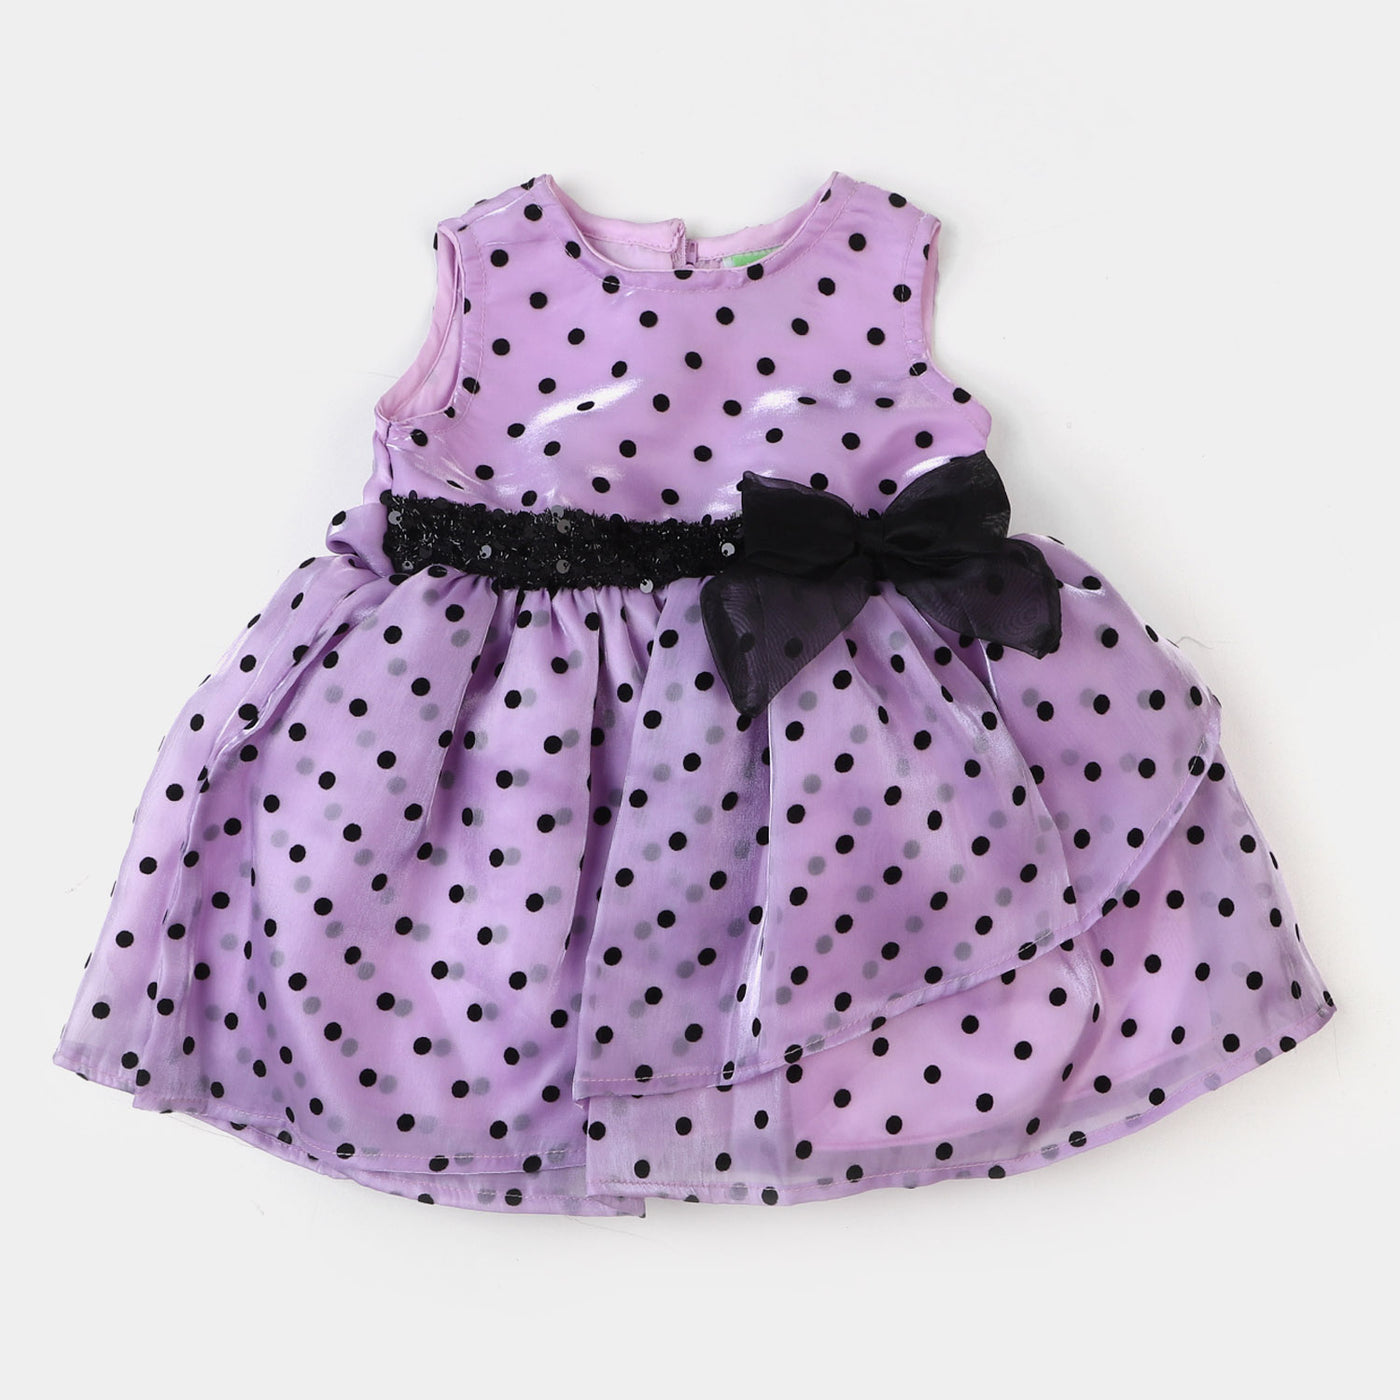 Buy Fashionable Frocks  Dresses For Infant Baby Girl  Smiley Buttons